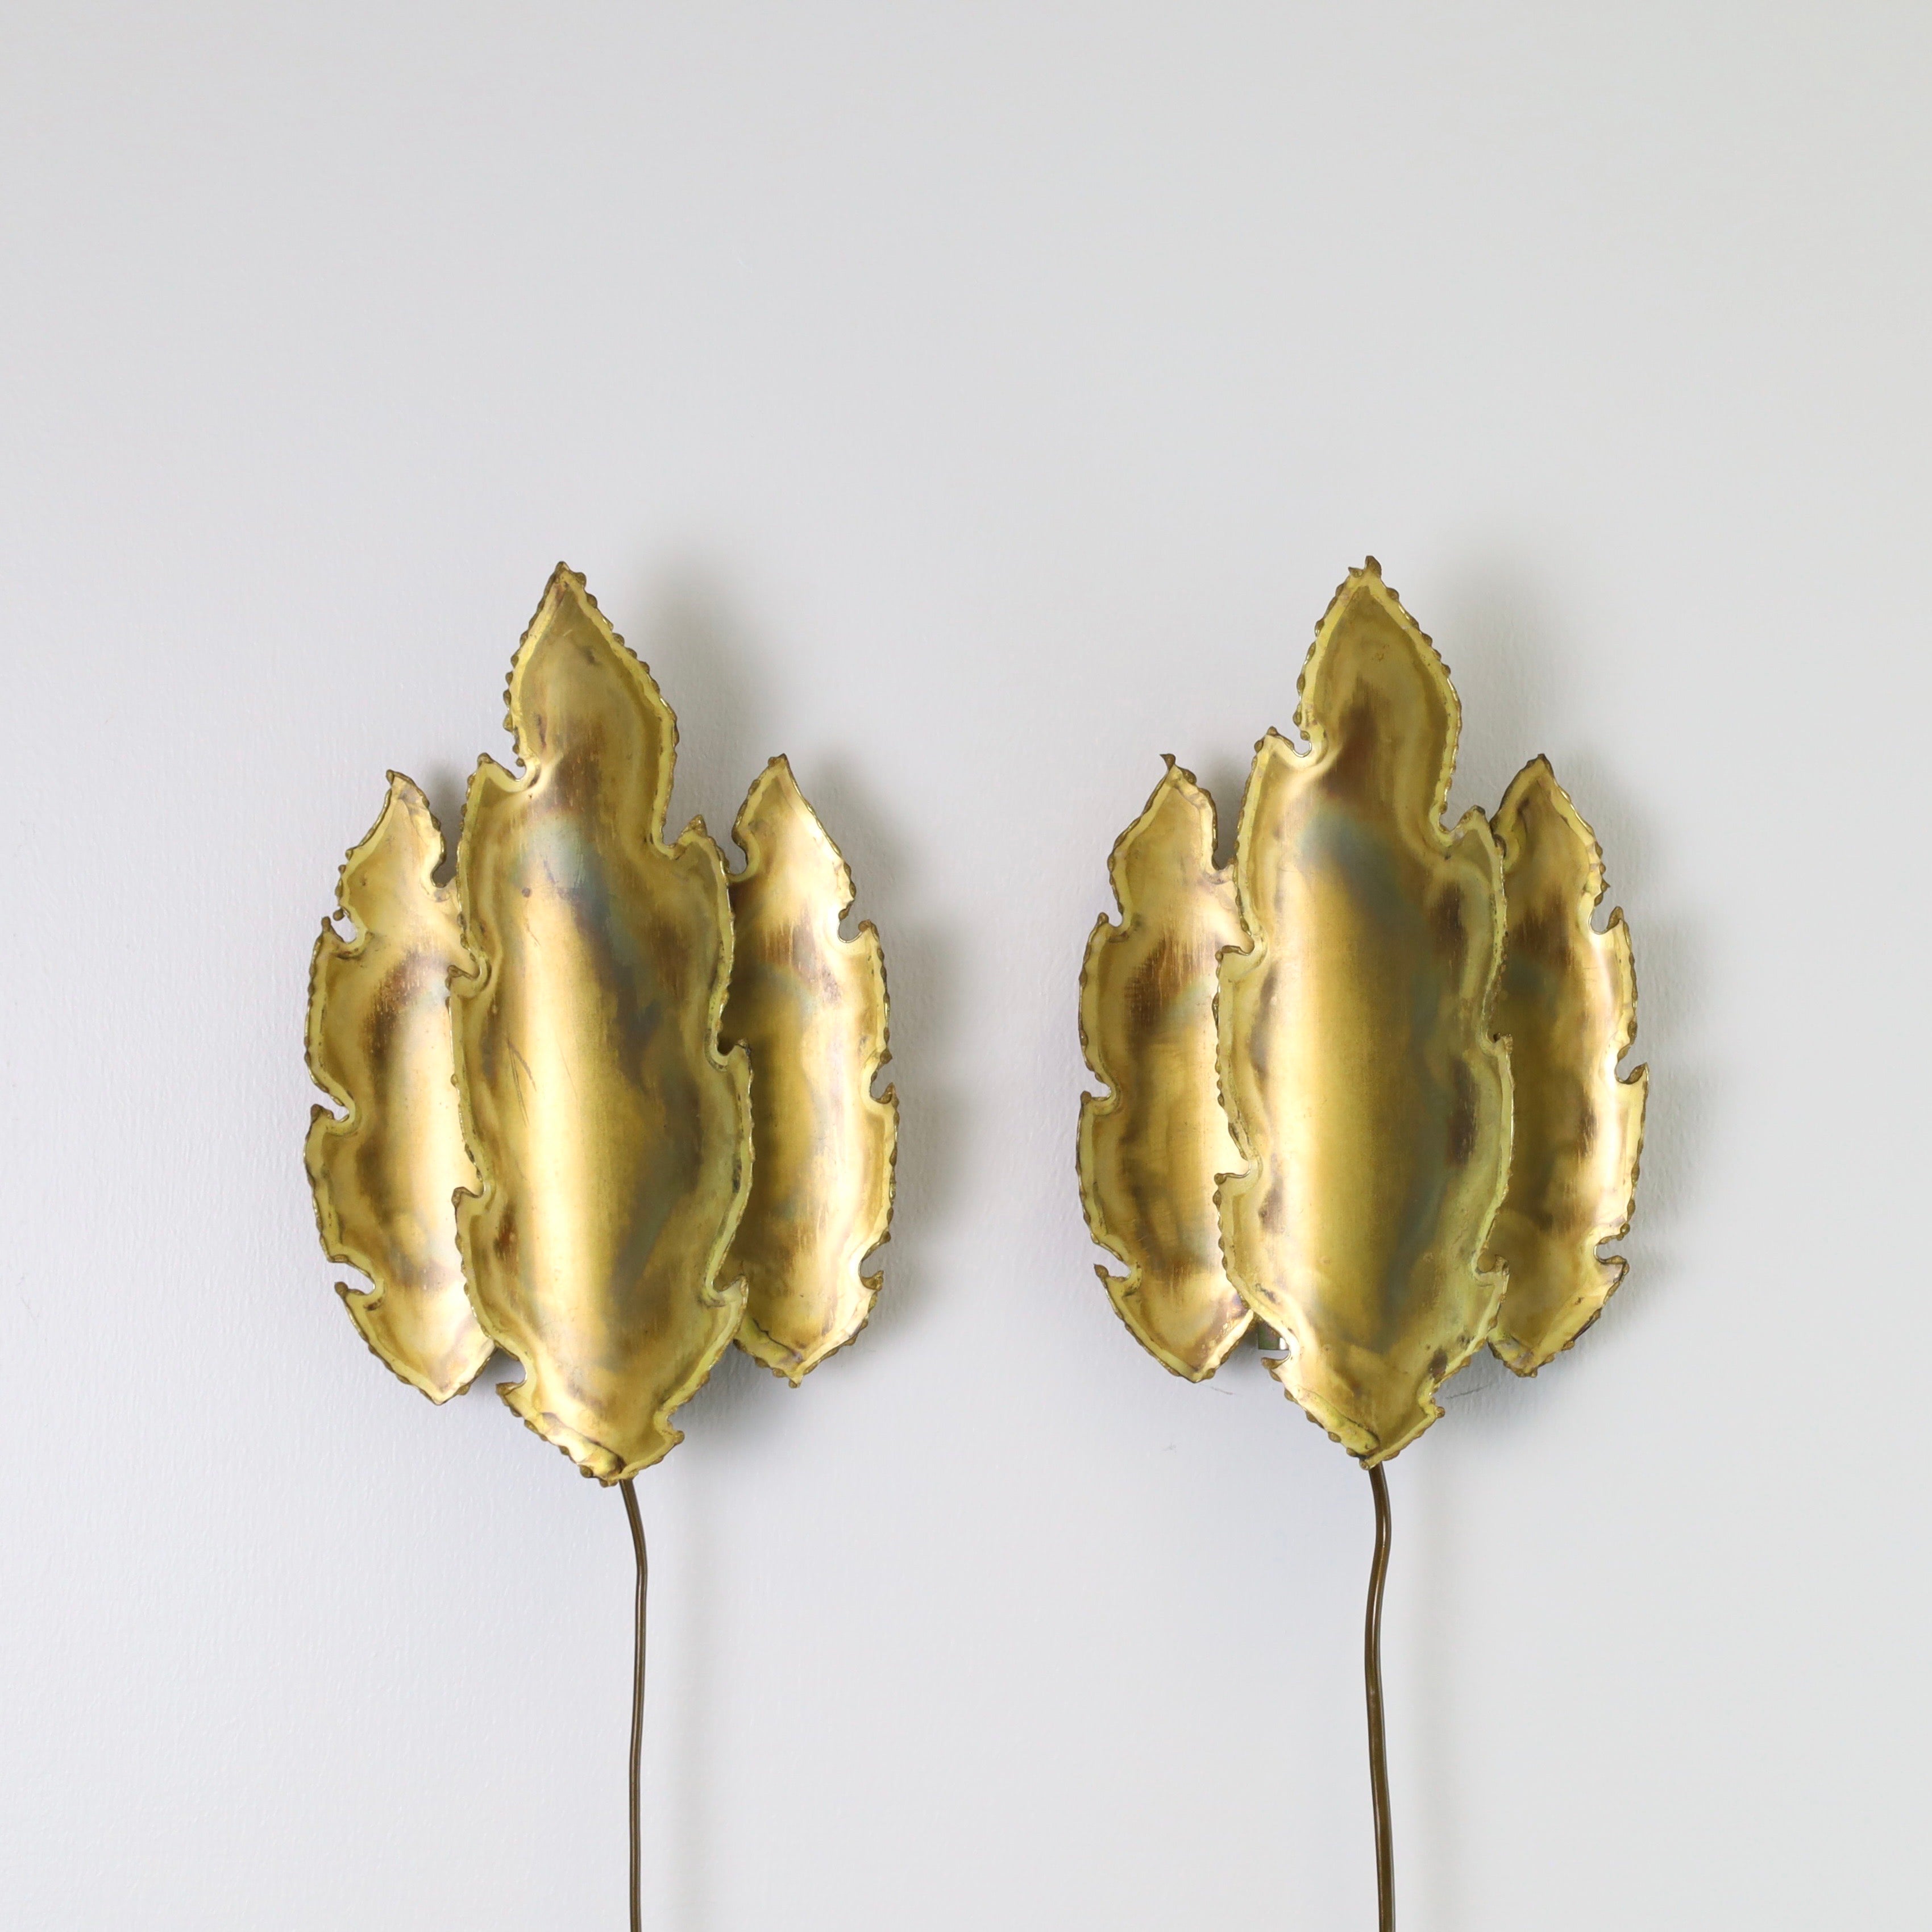 Pair of Leaf-Shaped Brass Wall Lamps by Svend Aage Holm Sorensen, 1960s, Denmark